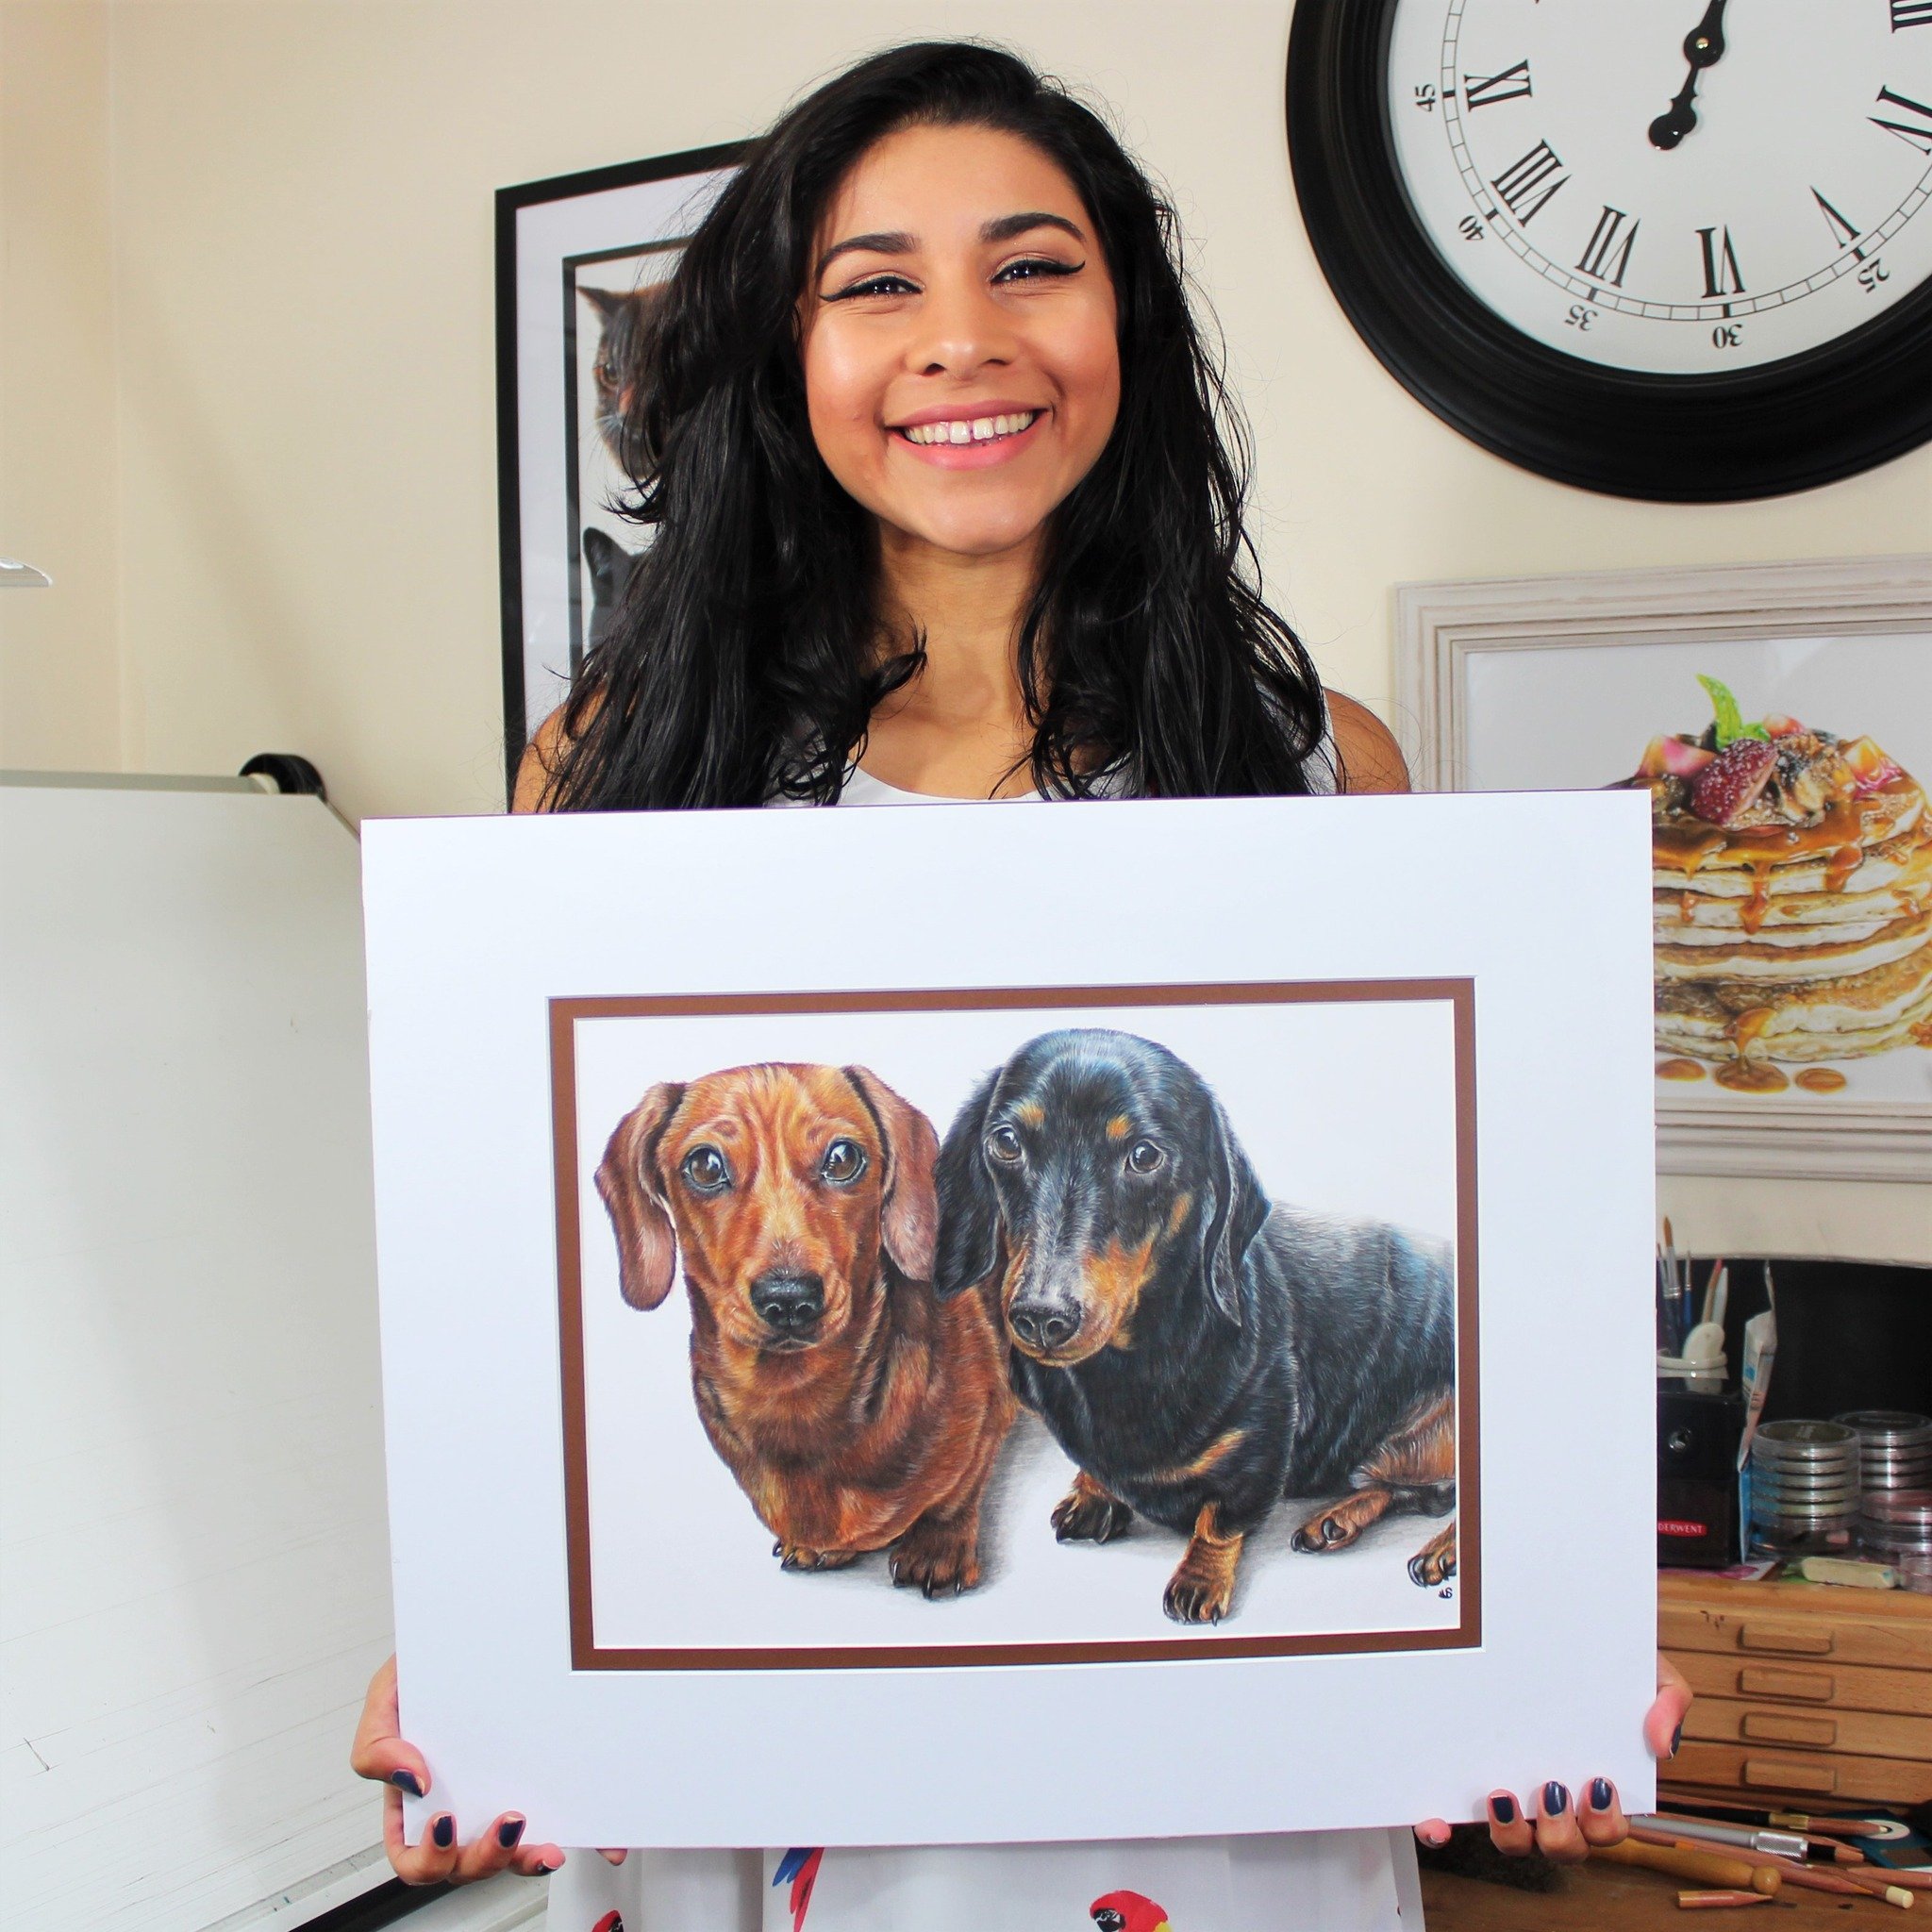 Do you remember when I drew these two cuties together from separate photos? Aww, Maisy &amp; Myley, it was so cute to see them looking at their portrait. Do you have a Dachshund? Post their picture below!